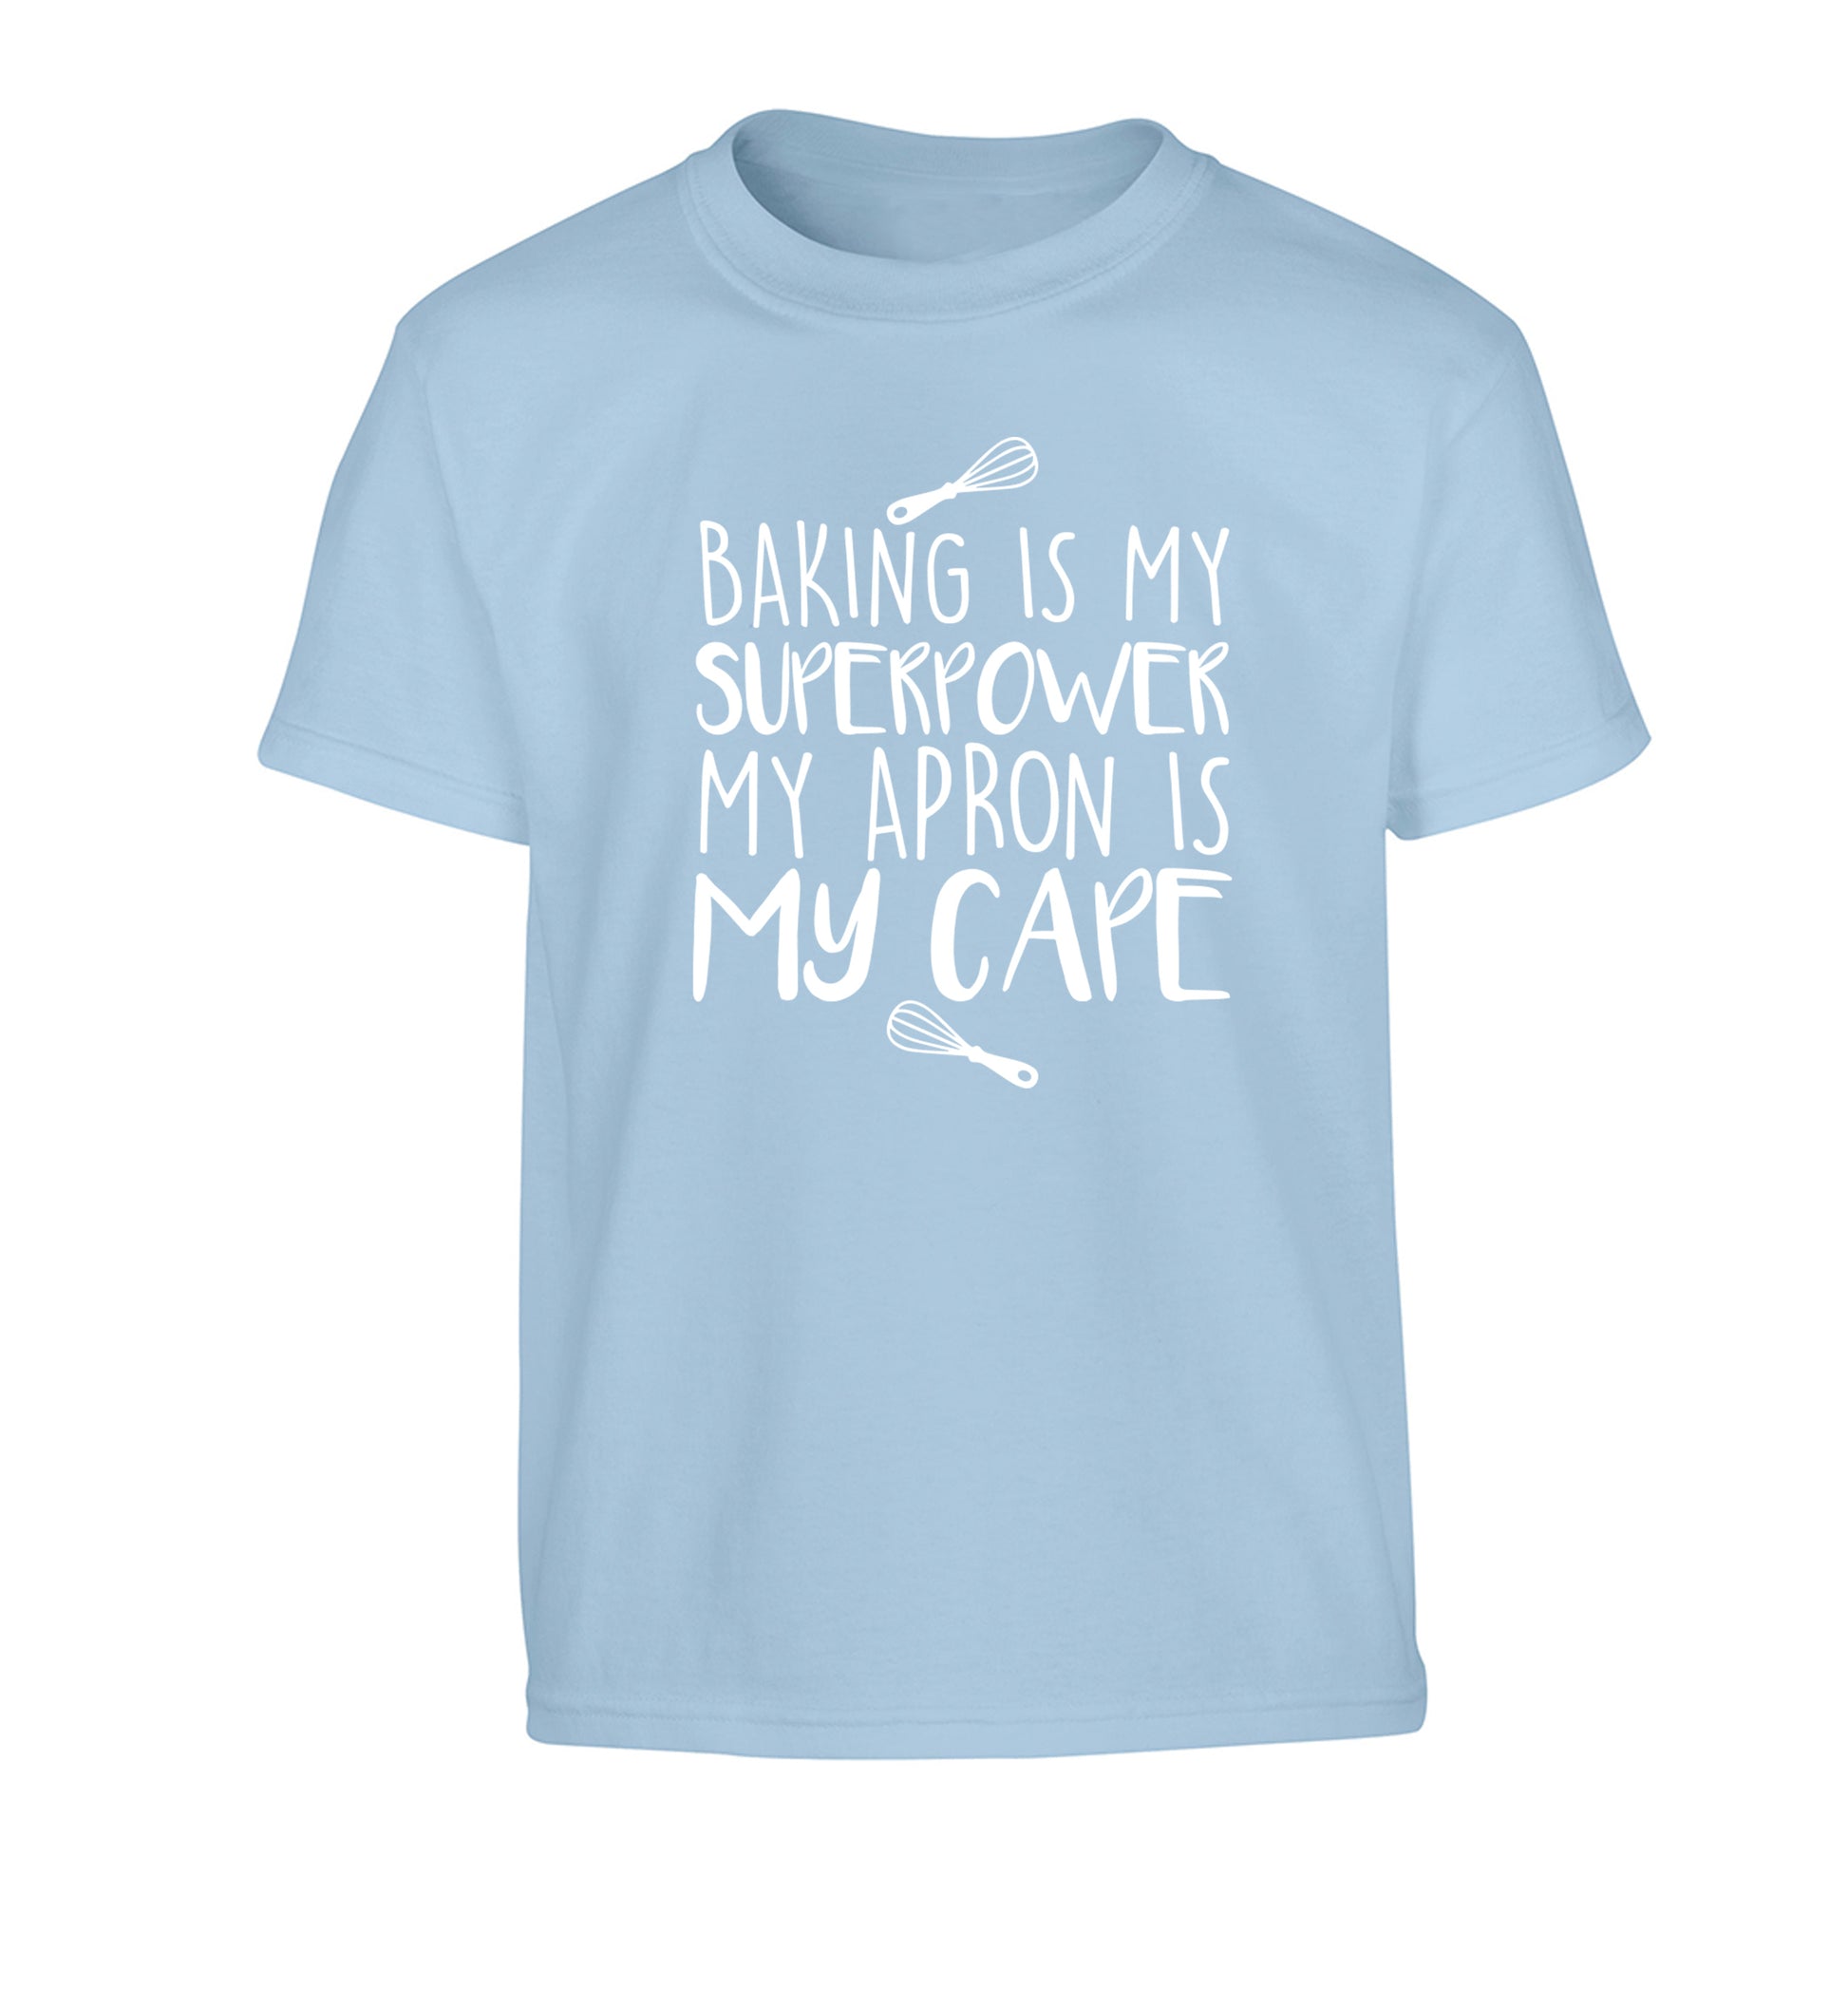 Baking is my superpower my apron is my cape Children's light blue Tshirt 12-14 Years